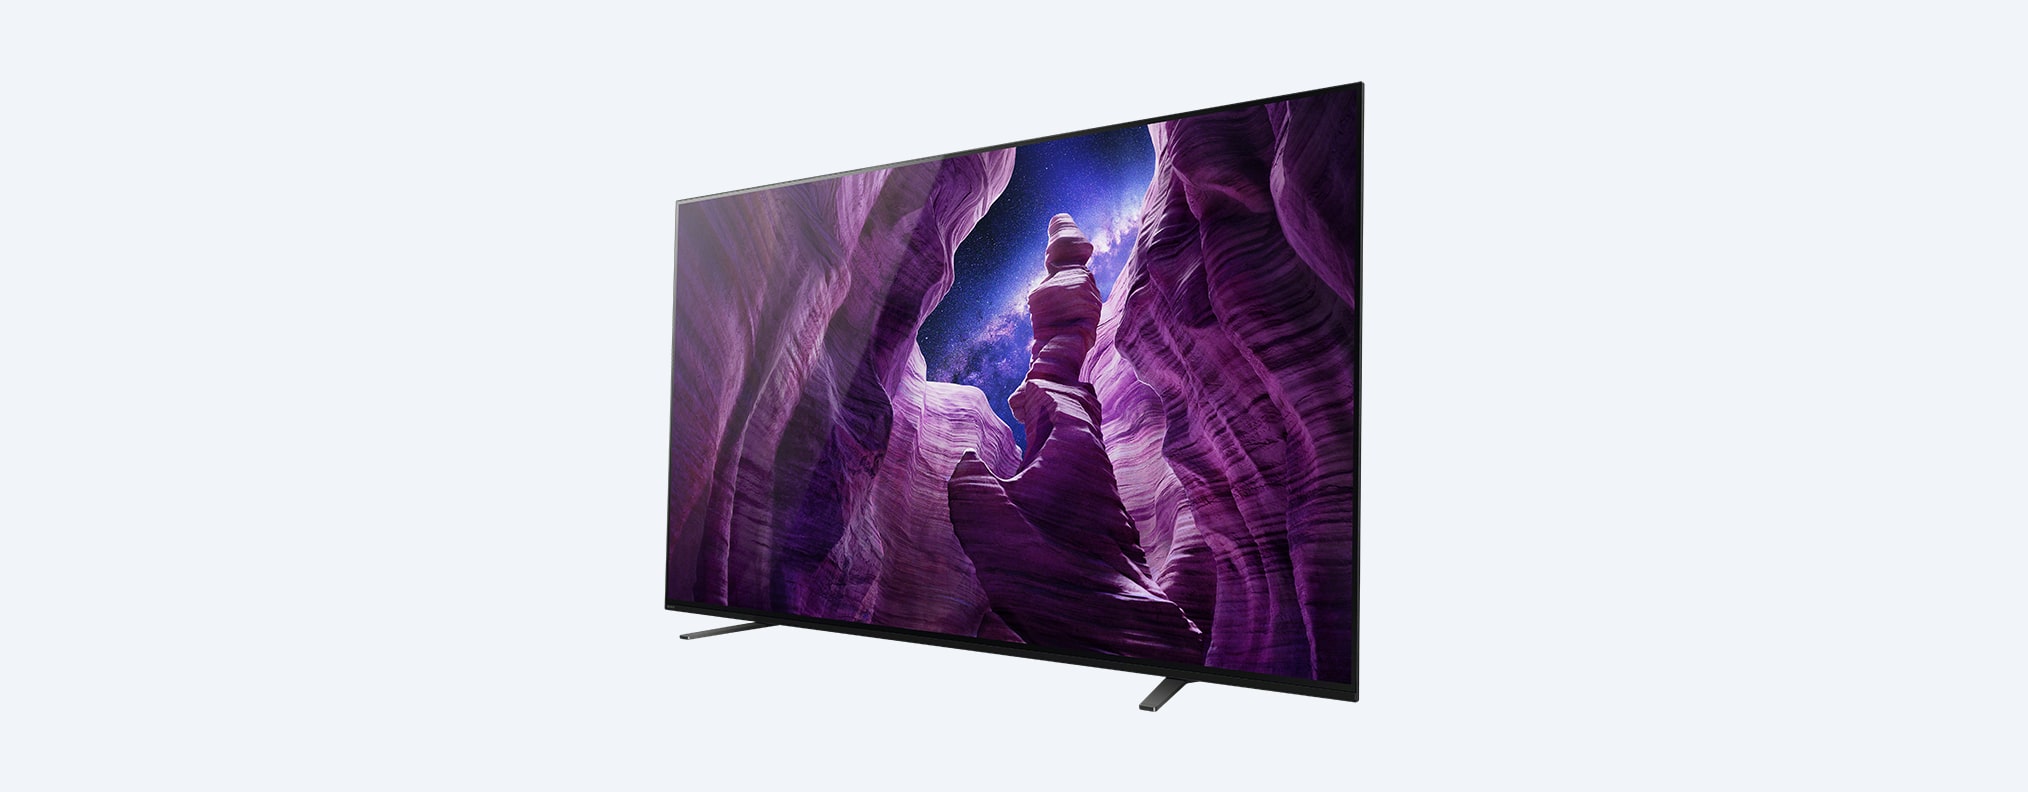 A8 | OLED | 4K Ultra HD | טווח דינמי גבוה (HDR) | Smart TV (Android TV)